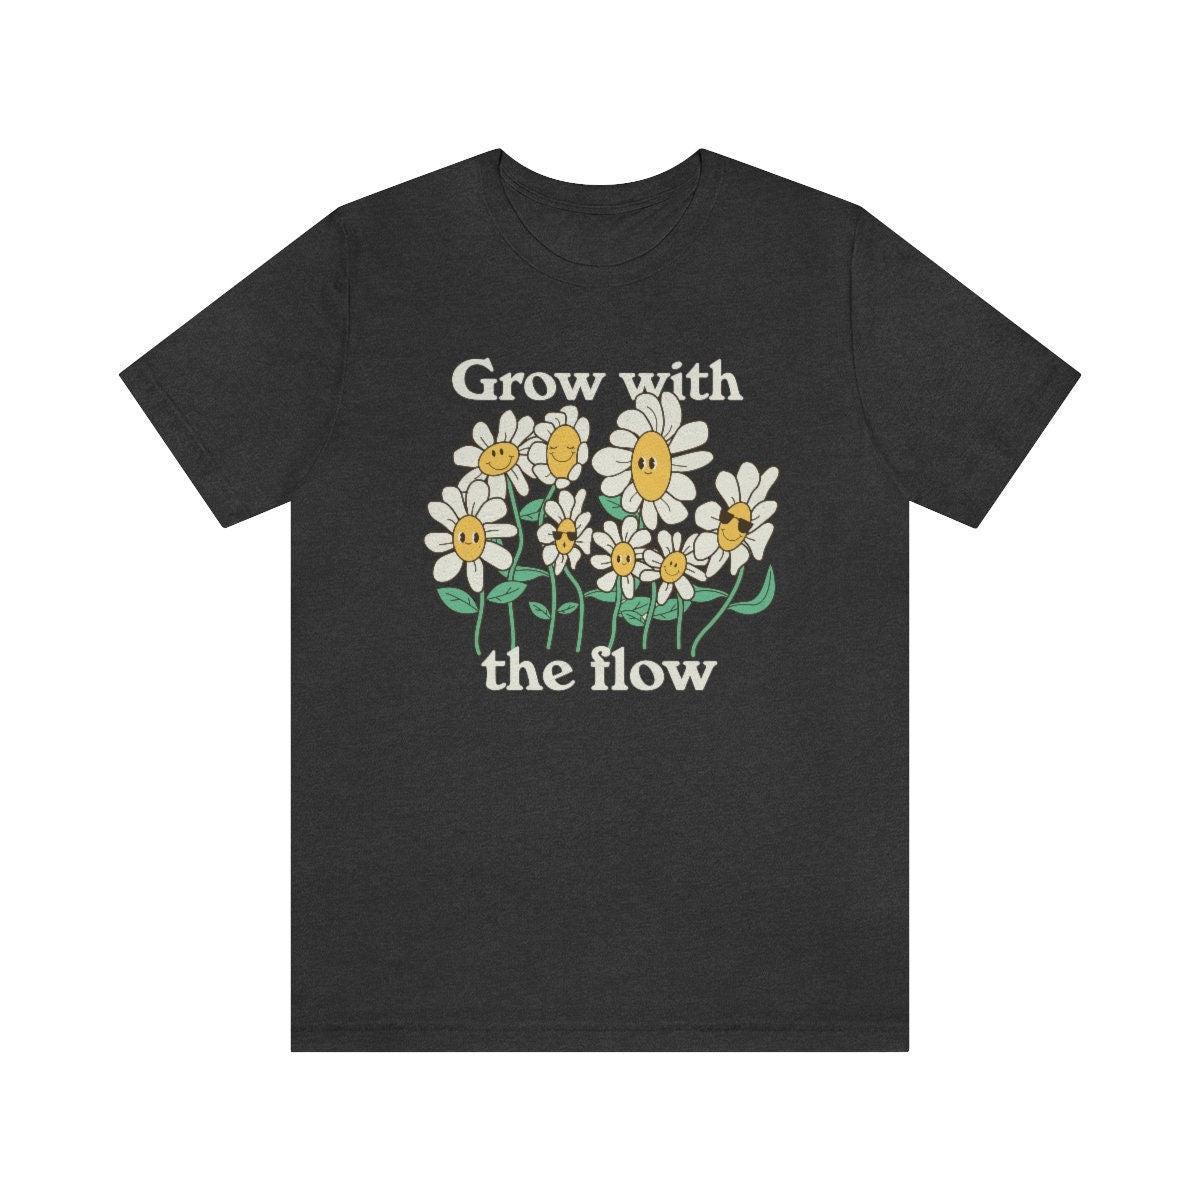 'Grow With The Flow' Light Tshirt - T-shirts - Kinder Planet Company